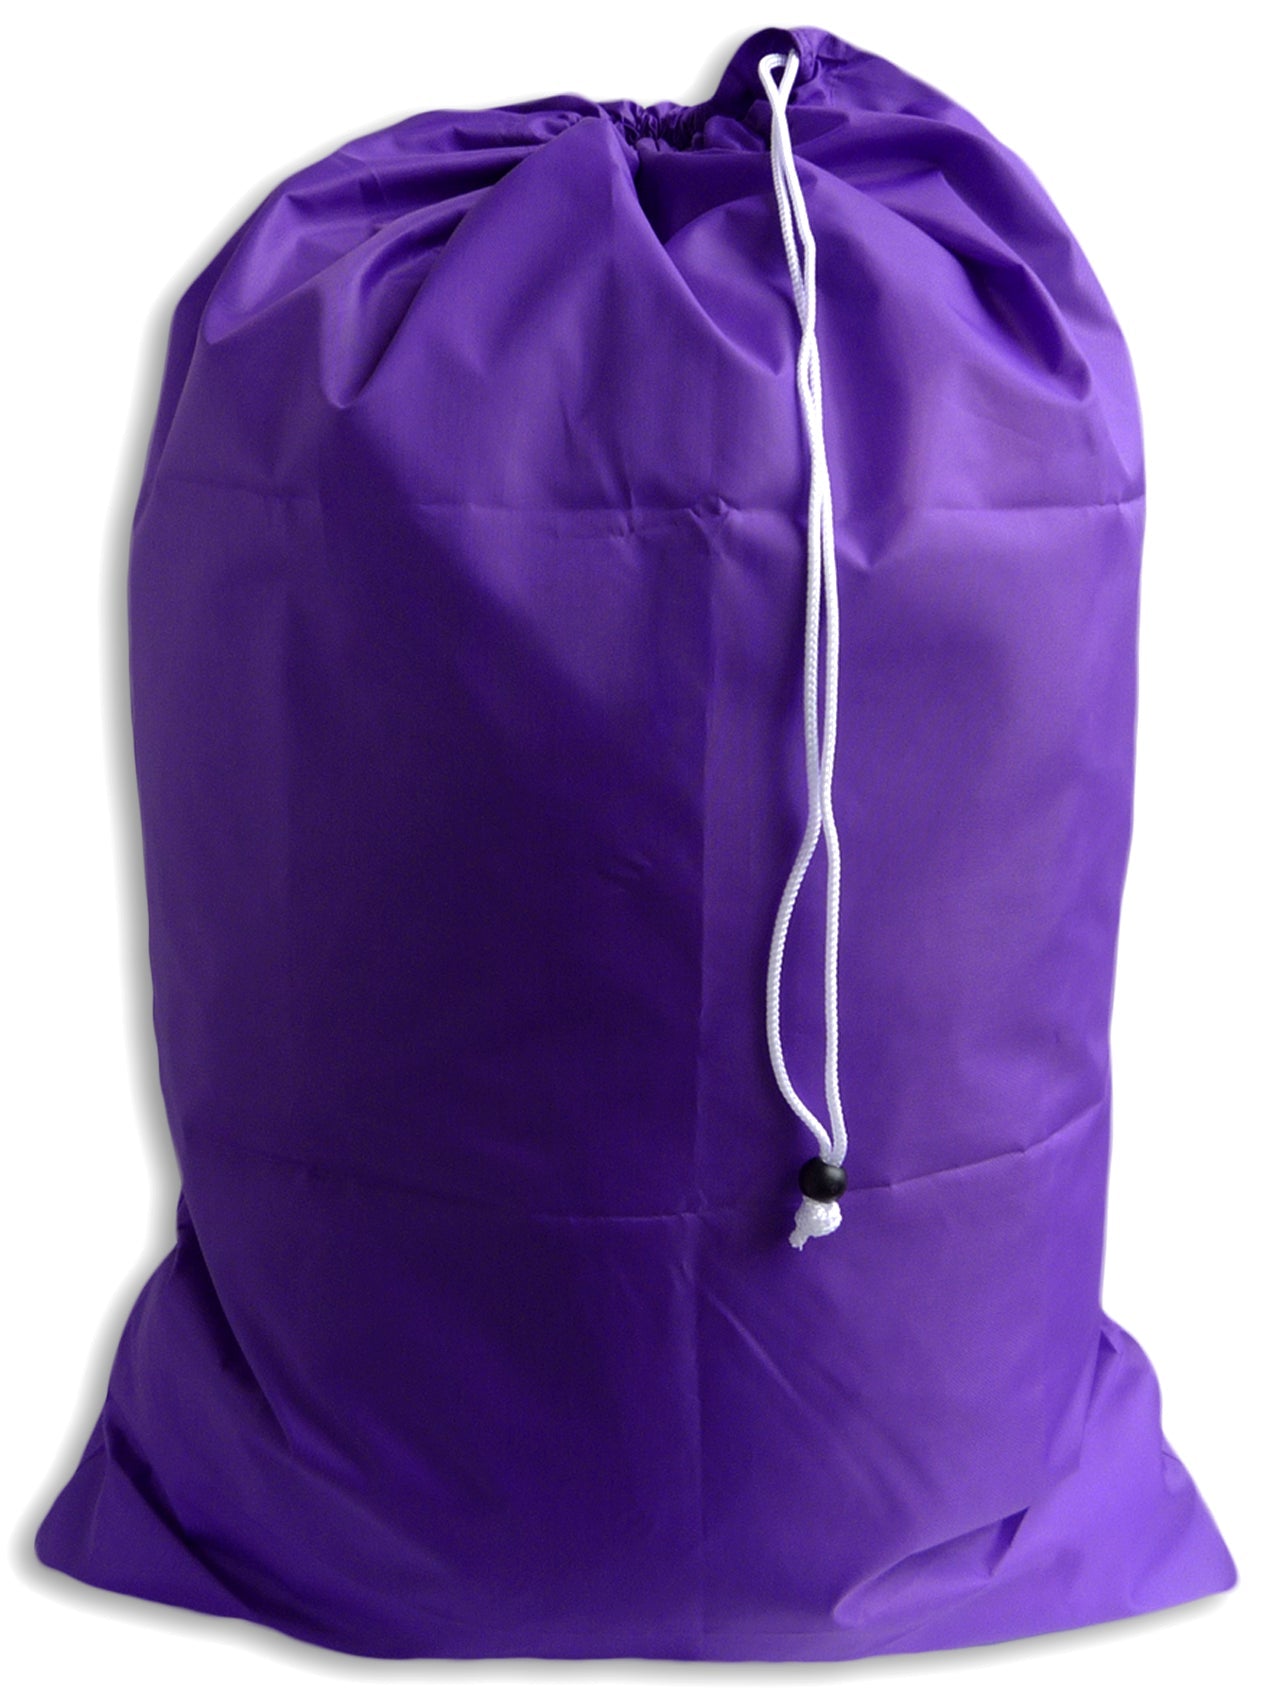 Large Laundry Bag with Drawstring and Locking Closure - Color: Purple,Size: 30x40